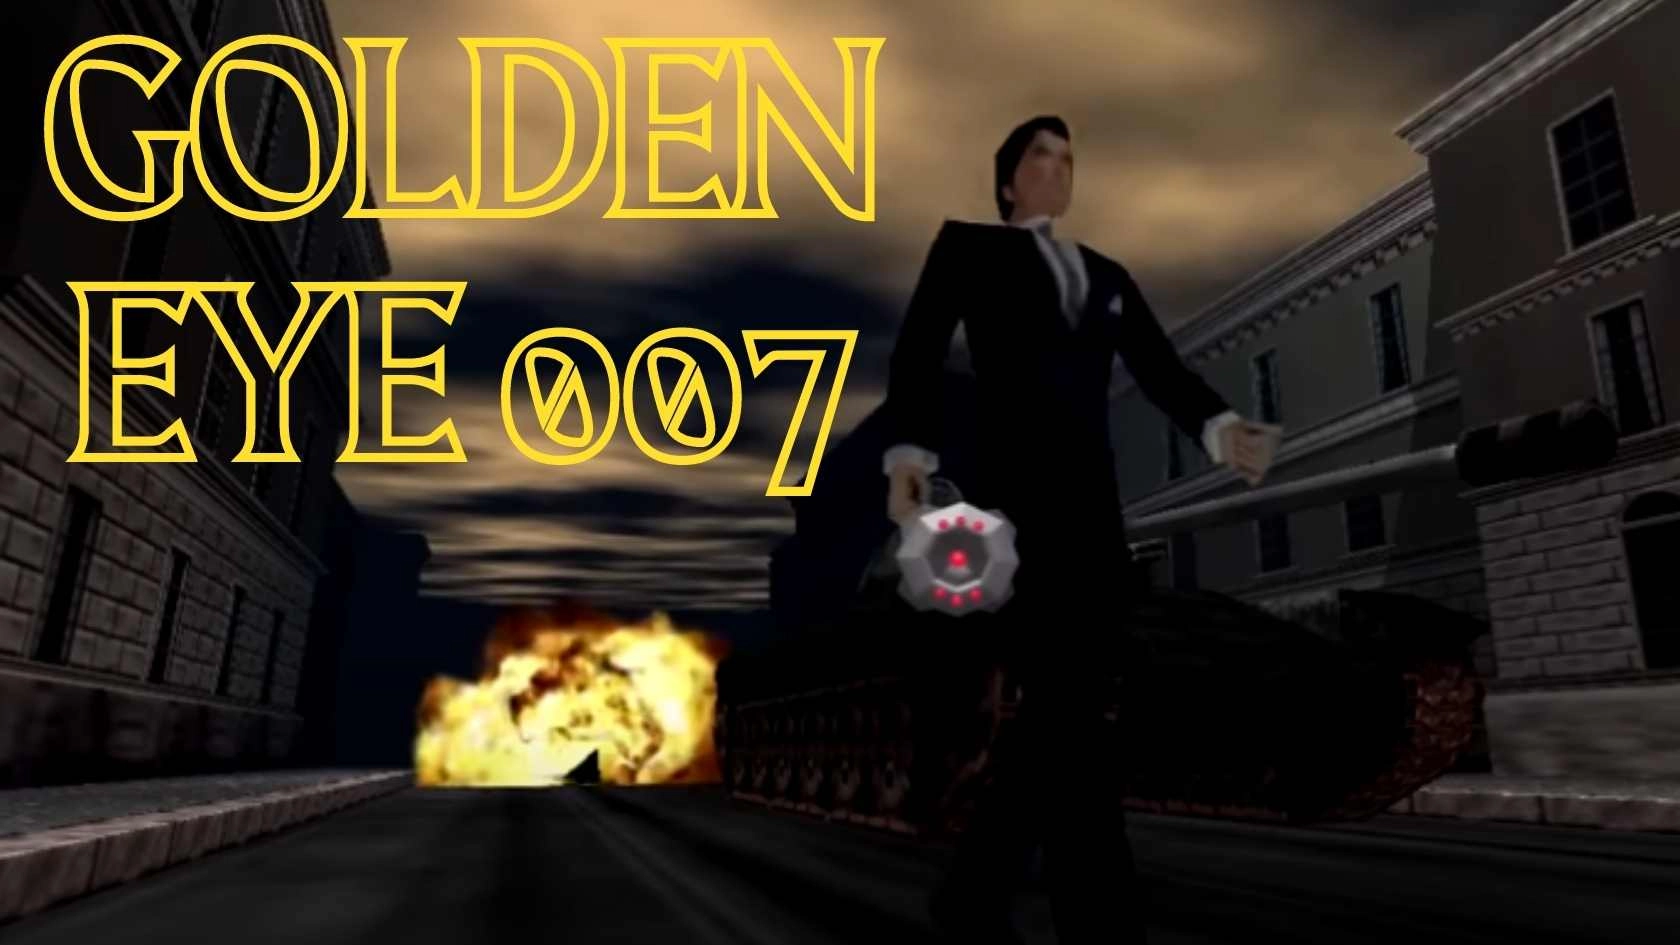 Golden Eye 007 Parents Guide and Age Rating (1997)